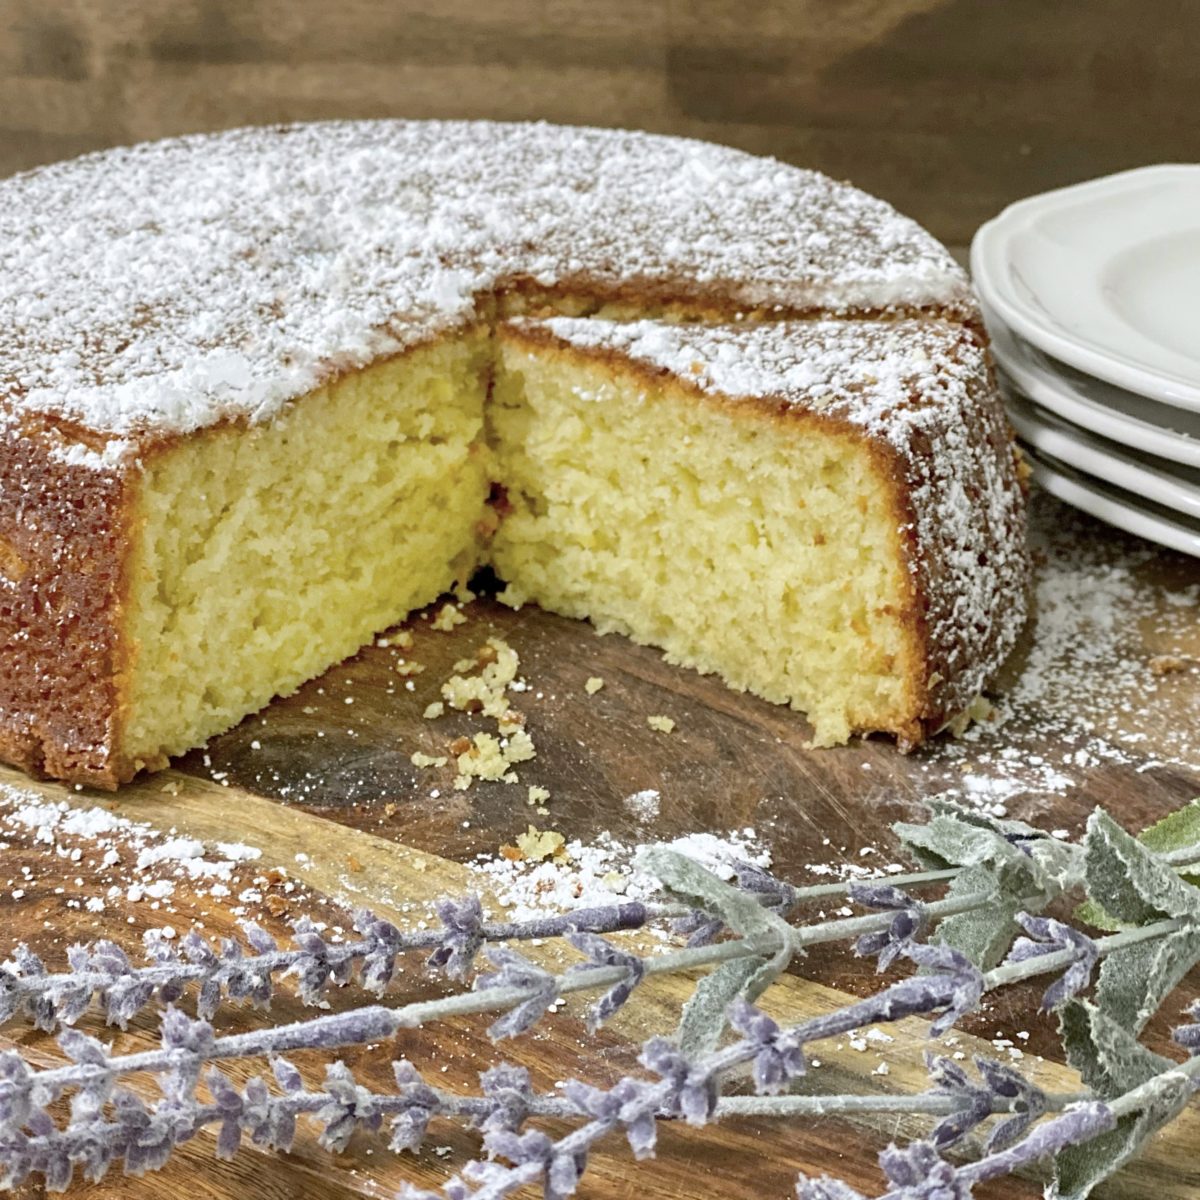 Lemon and lavender cake on a sliced with lavender in the foreground.